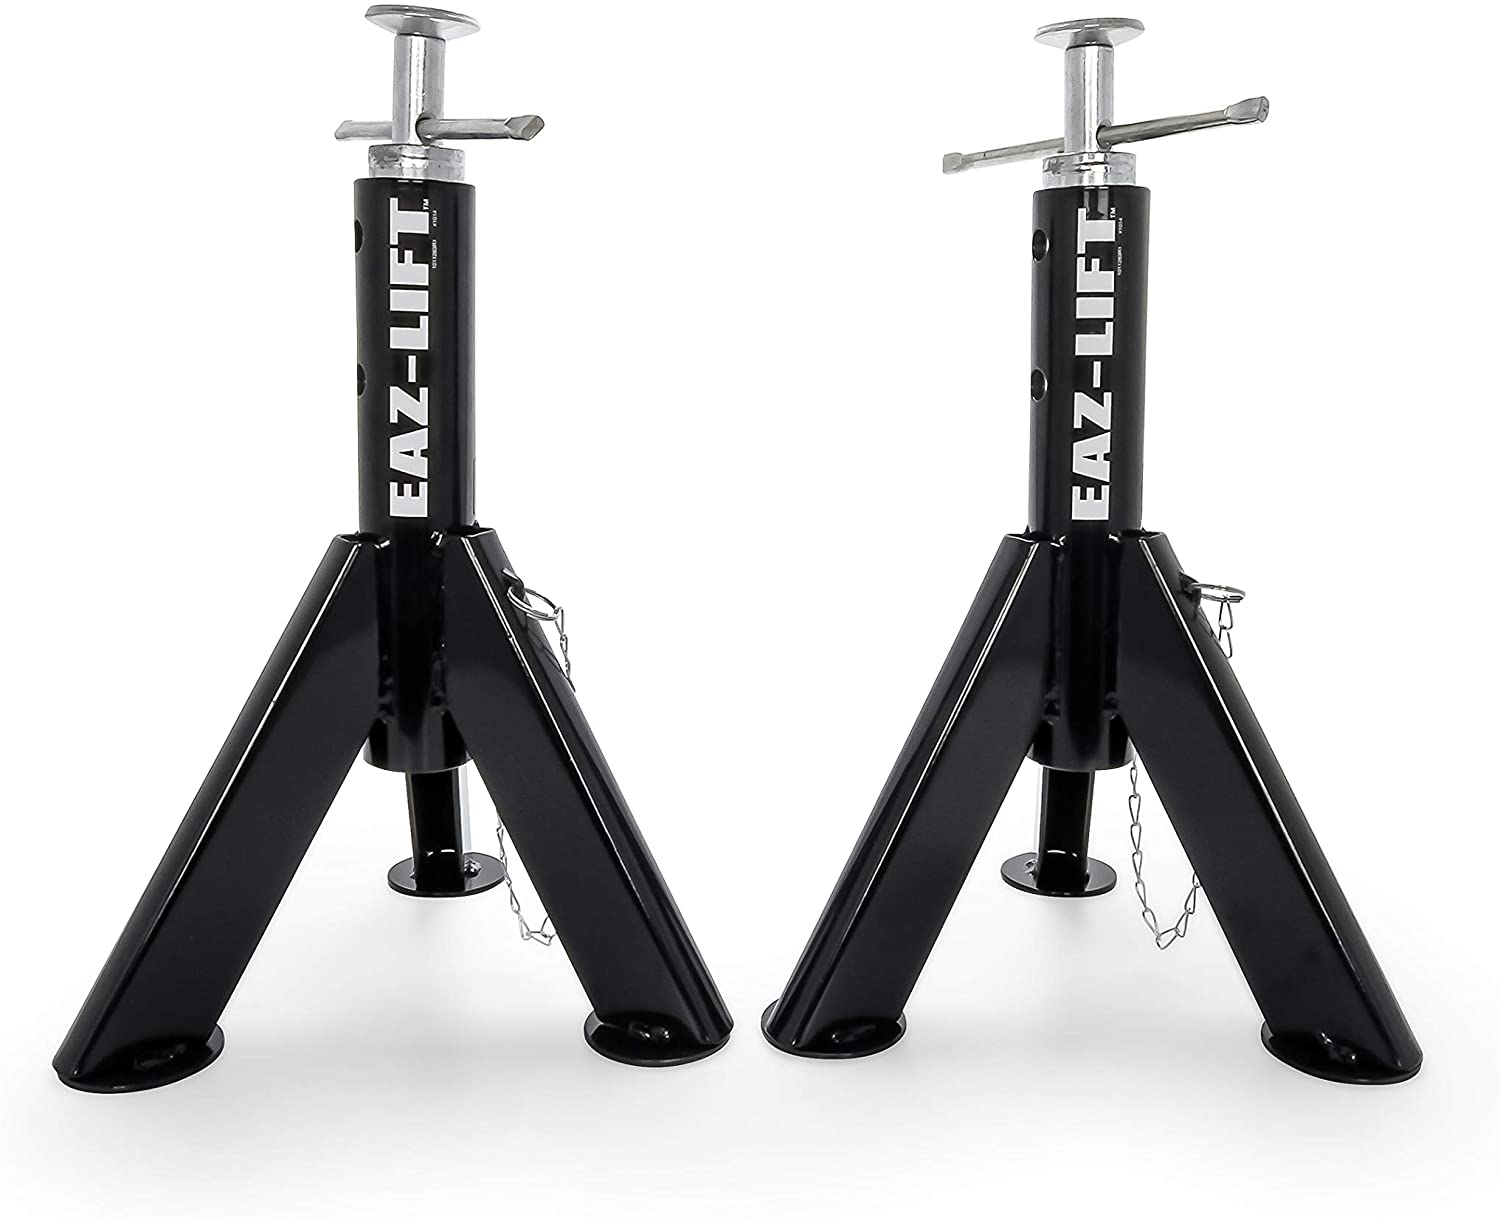 EAZ LIFT Telescopic RV Jack, Set of 2 | Adjusts from 16-inches to 30-inches | Featues a 6,000 lb. Load Capacity (48864)